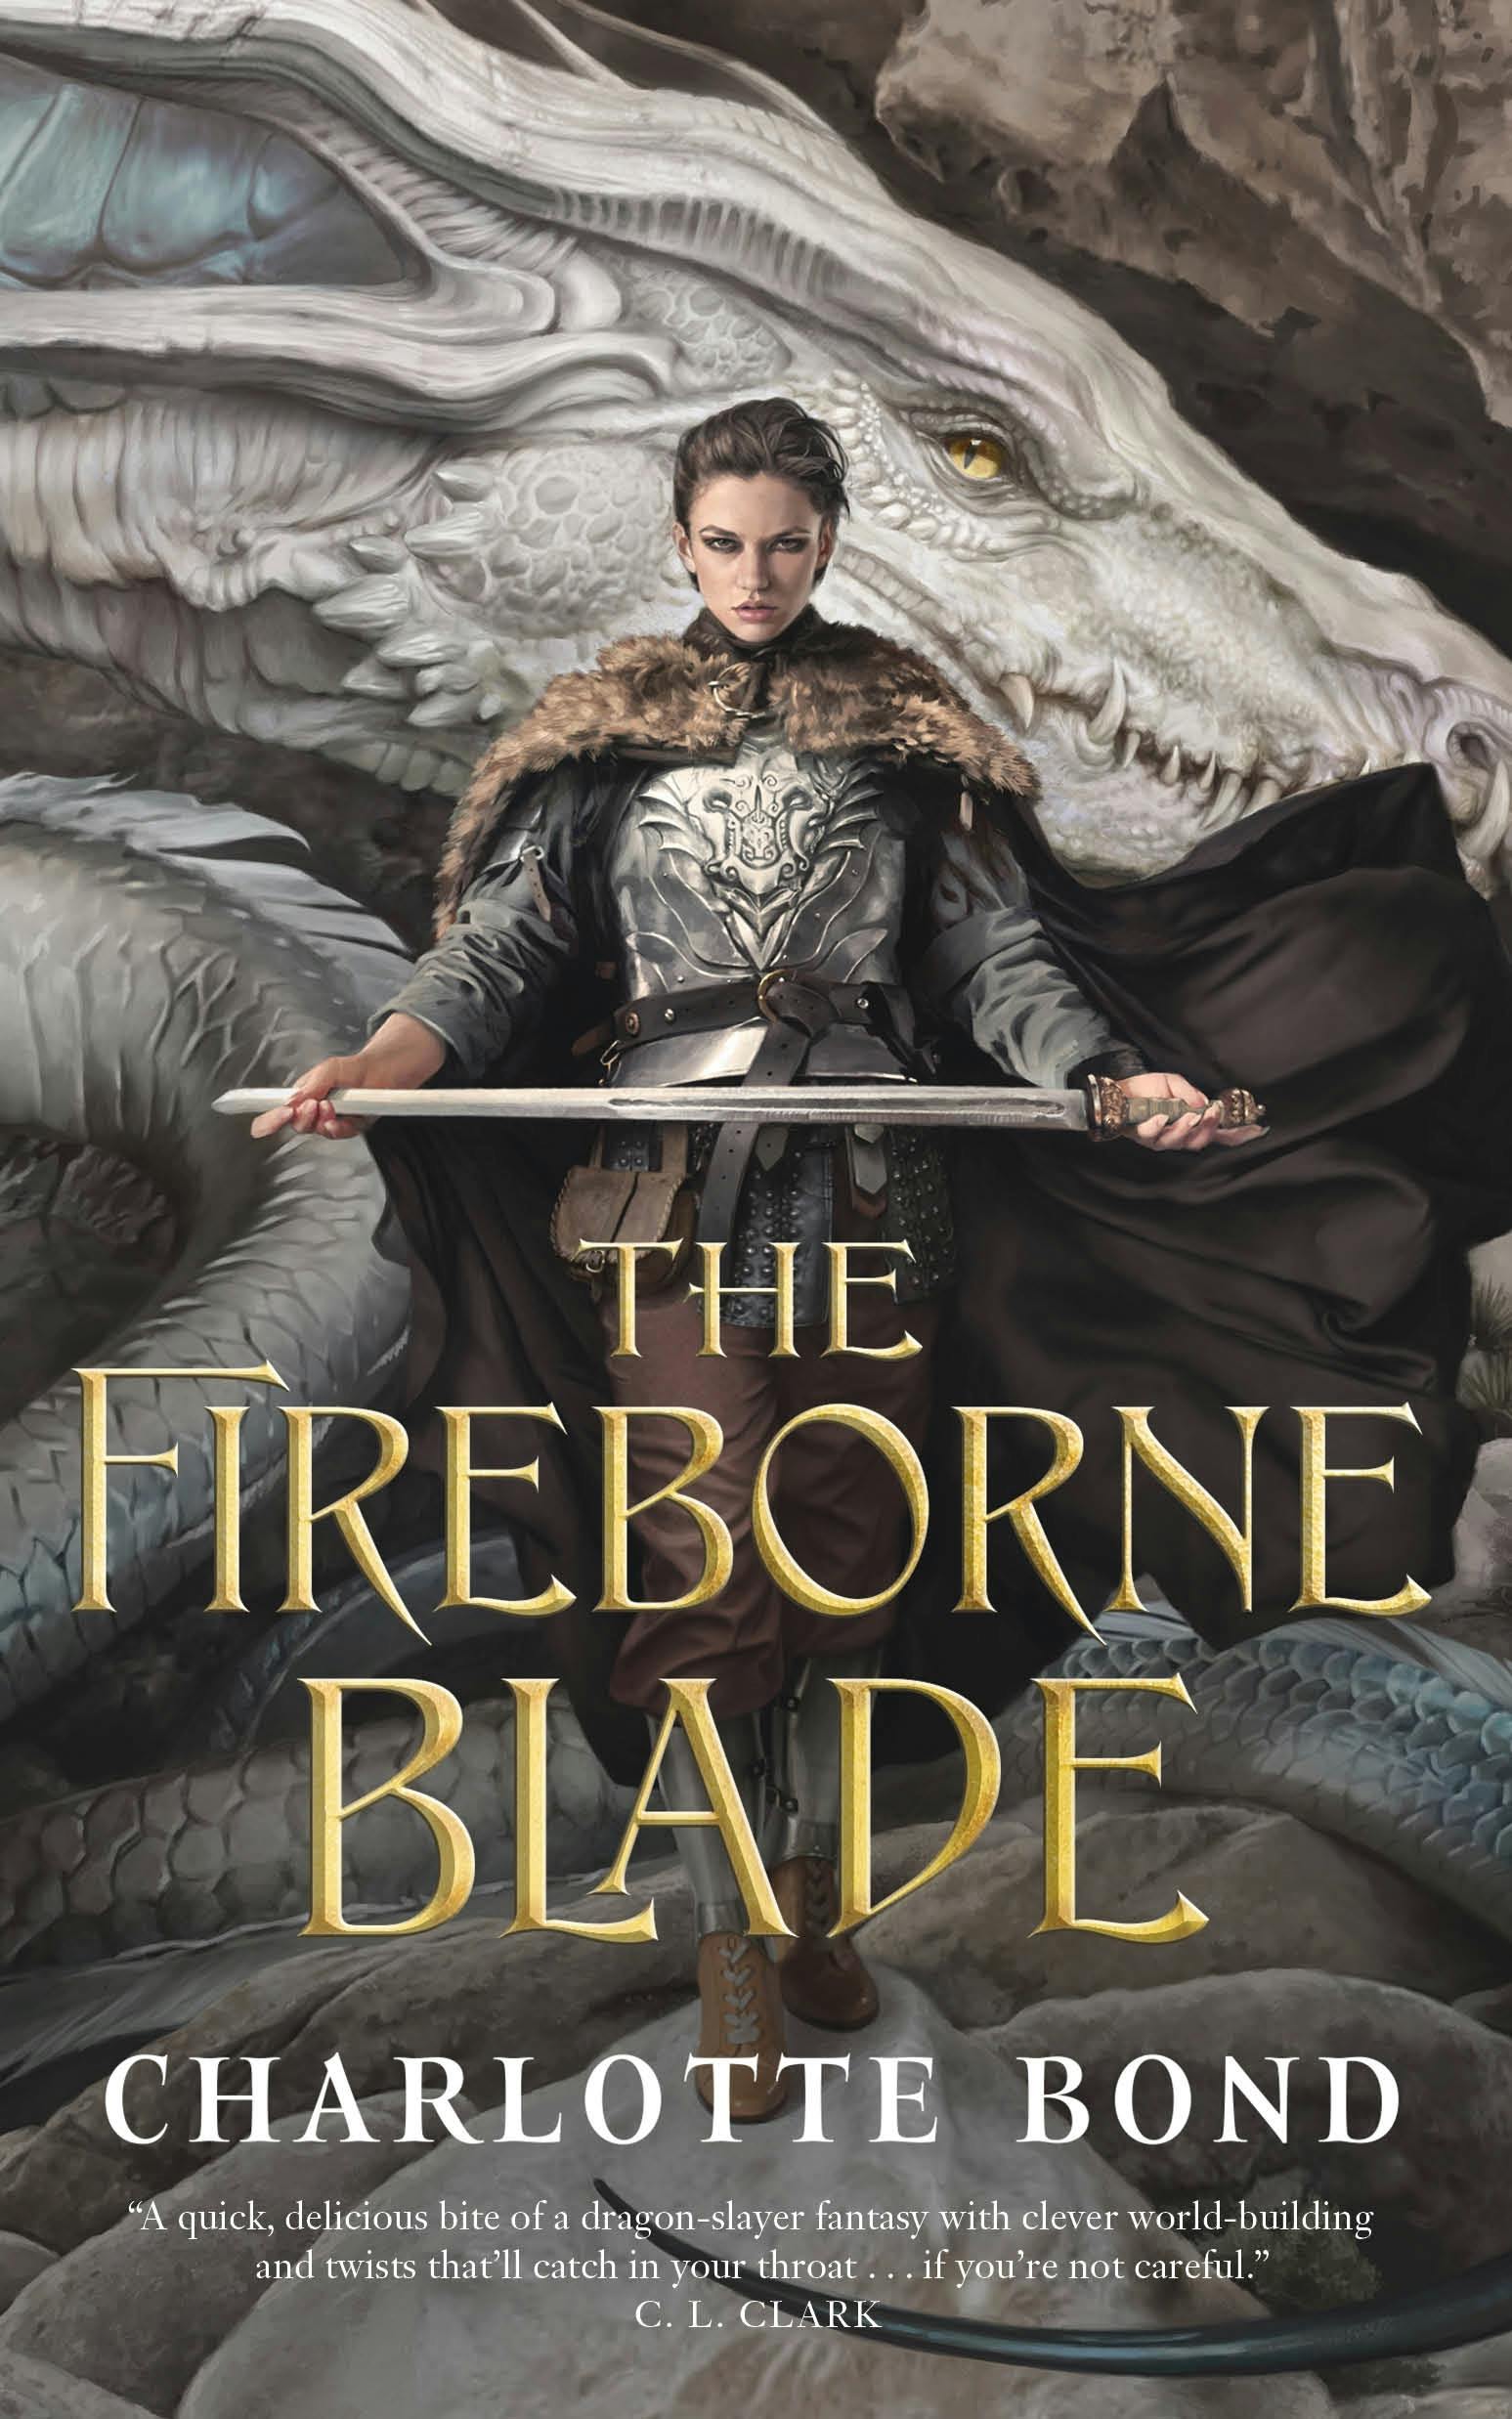 Cover for the book titled as: The Fireborne Blade